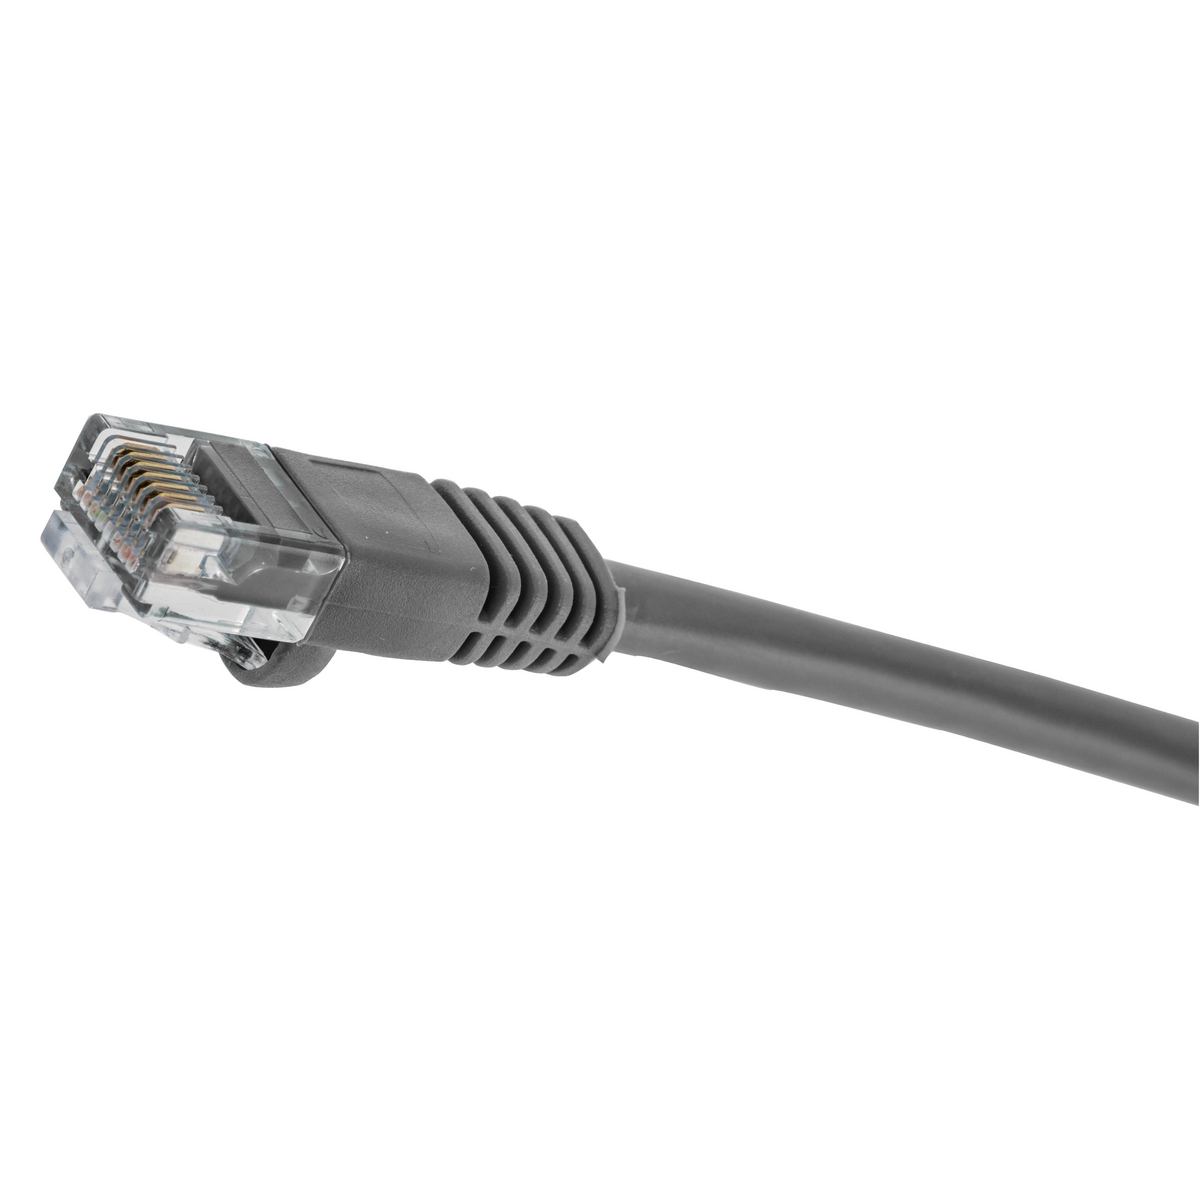 Hubbell Premise Wiring Products, Copper Solutions, Patch Cord,NETSELECT, Cat5E, Slim Style, Gray, 15' Length